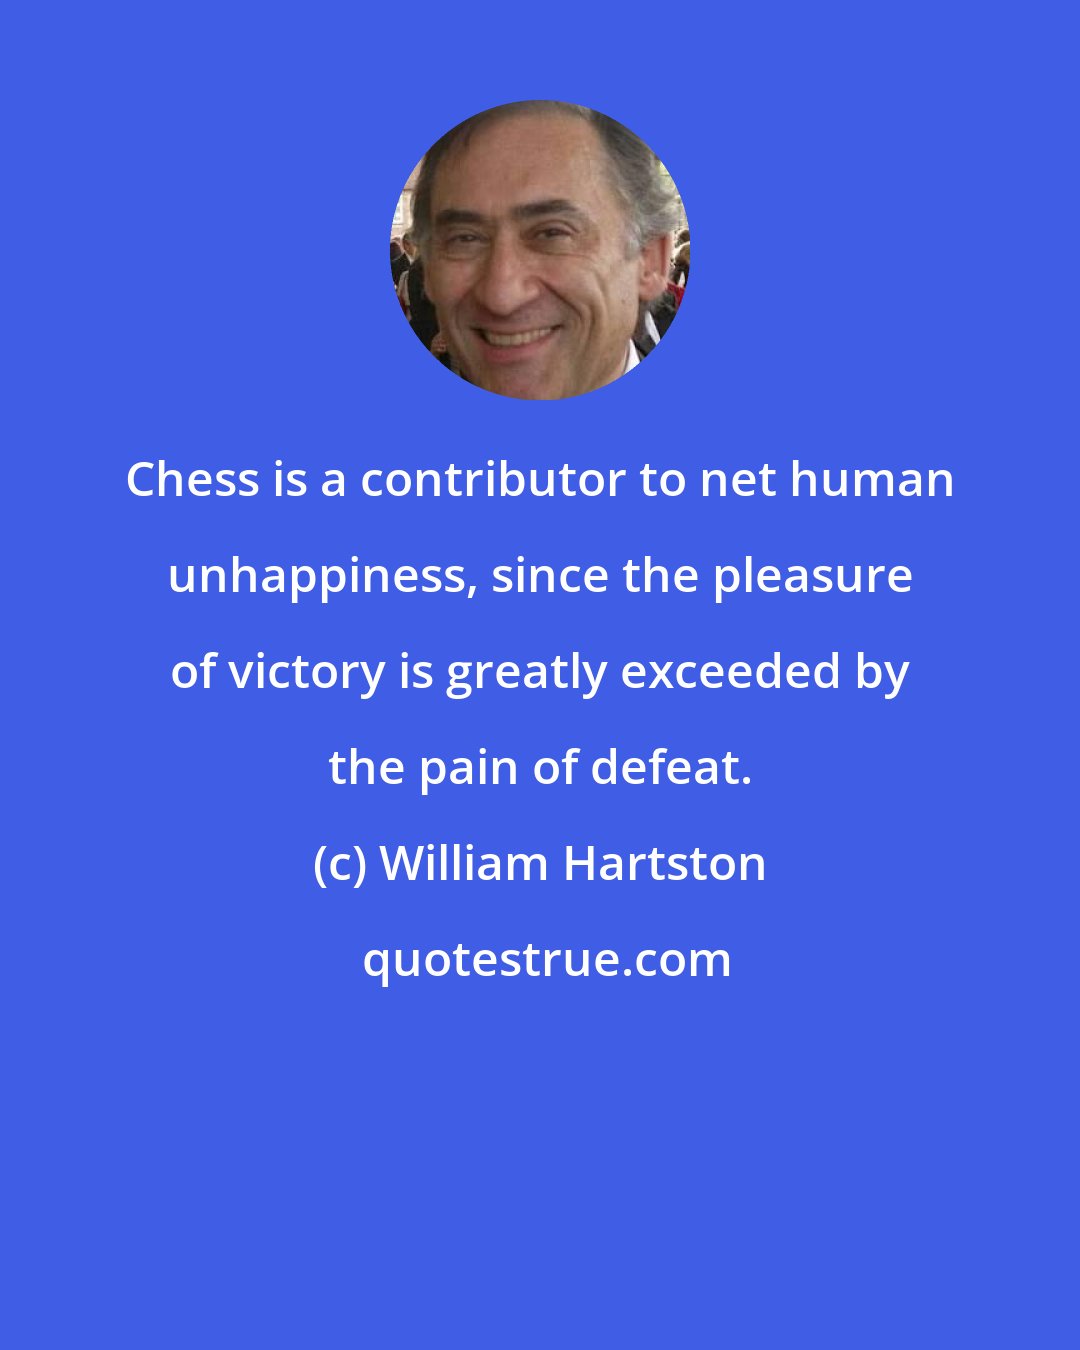 William Hartston: Chess is a contributor to net human unhappiness, since the pleasure of victory is greatly exceeded by the pain of defeat.